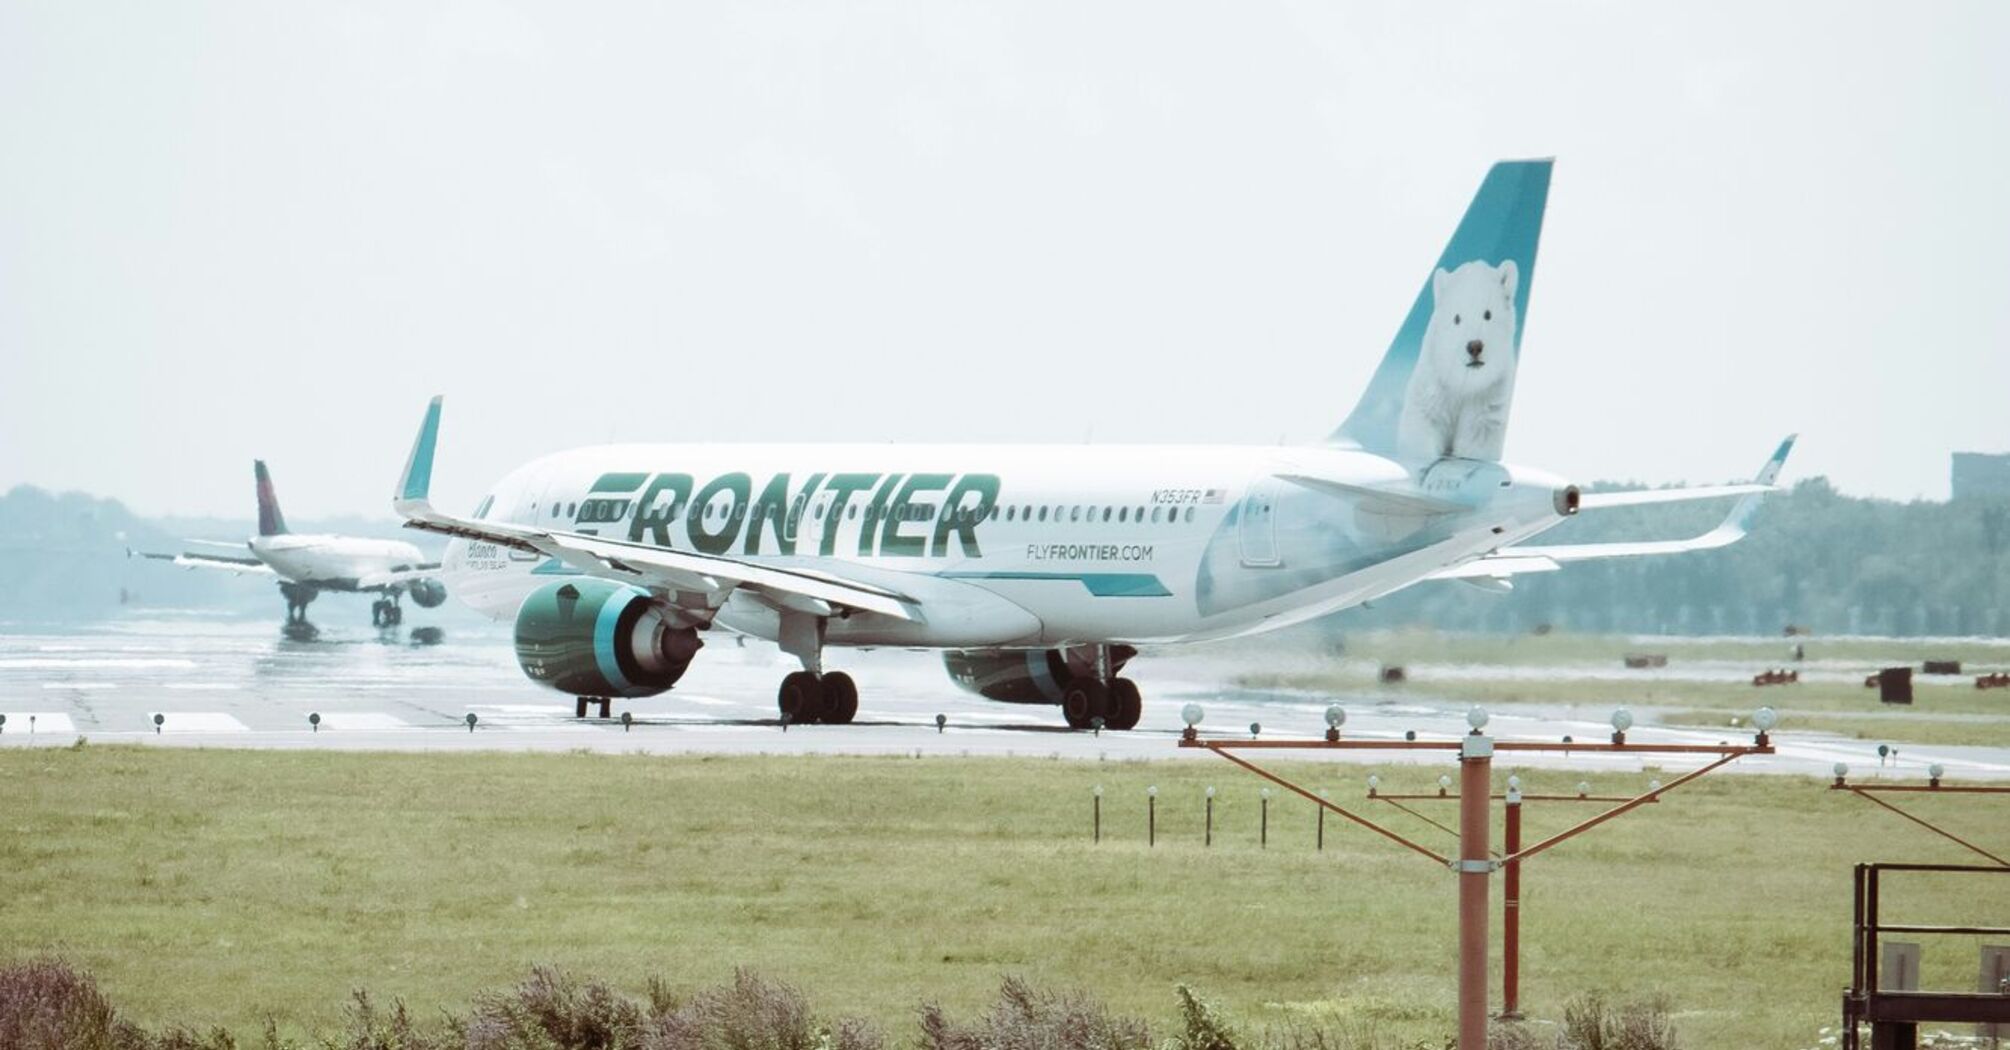 Tickets in business class for $129: Frontier Airlines has prepared a lucrative offer